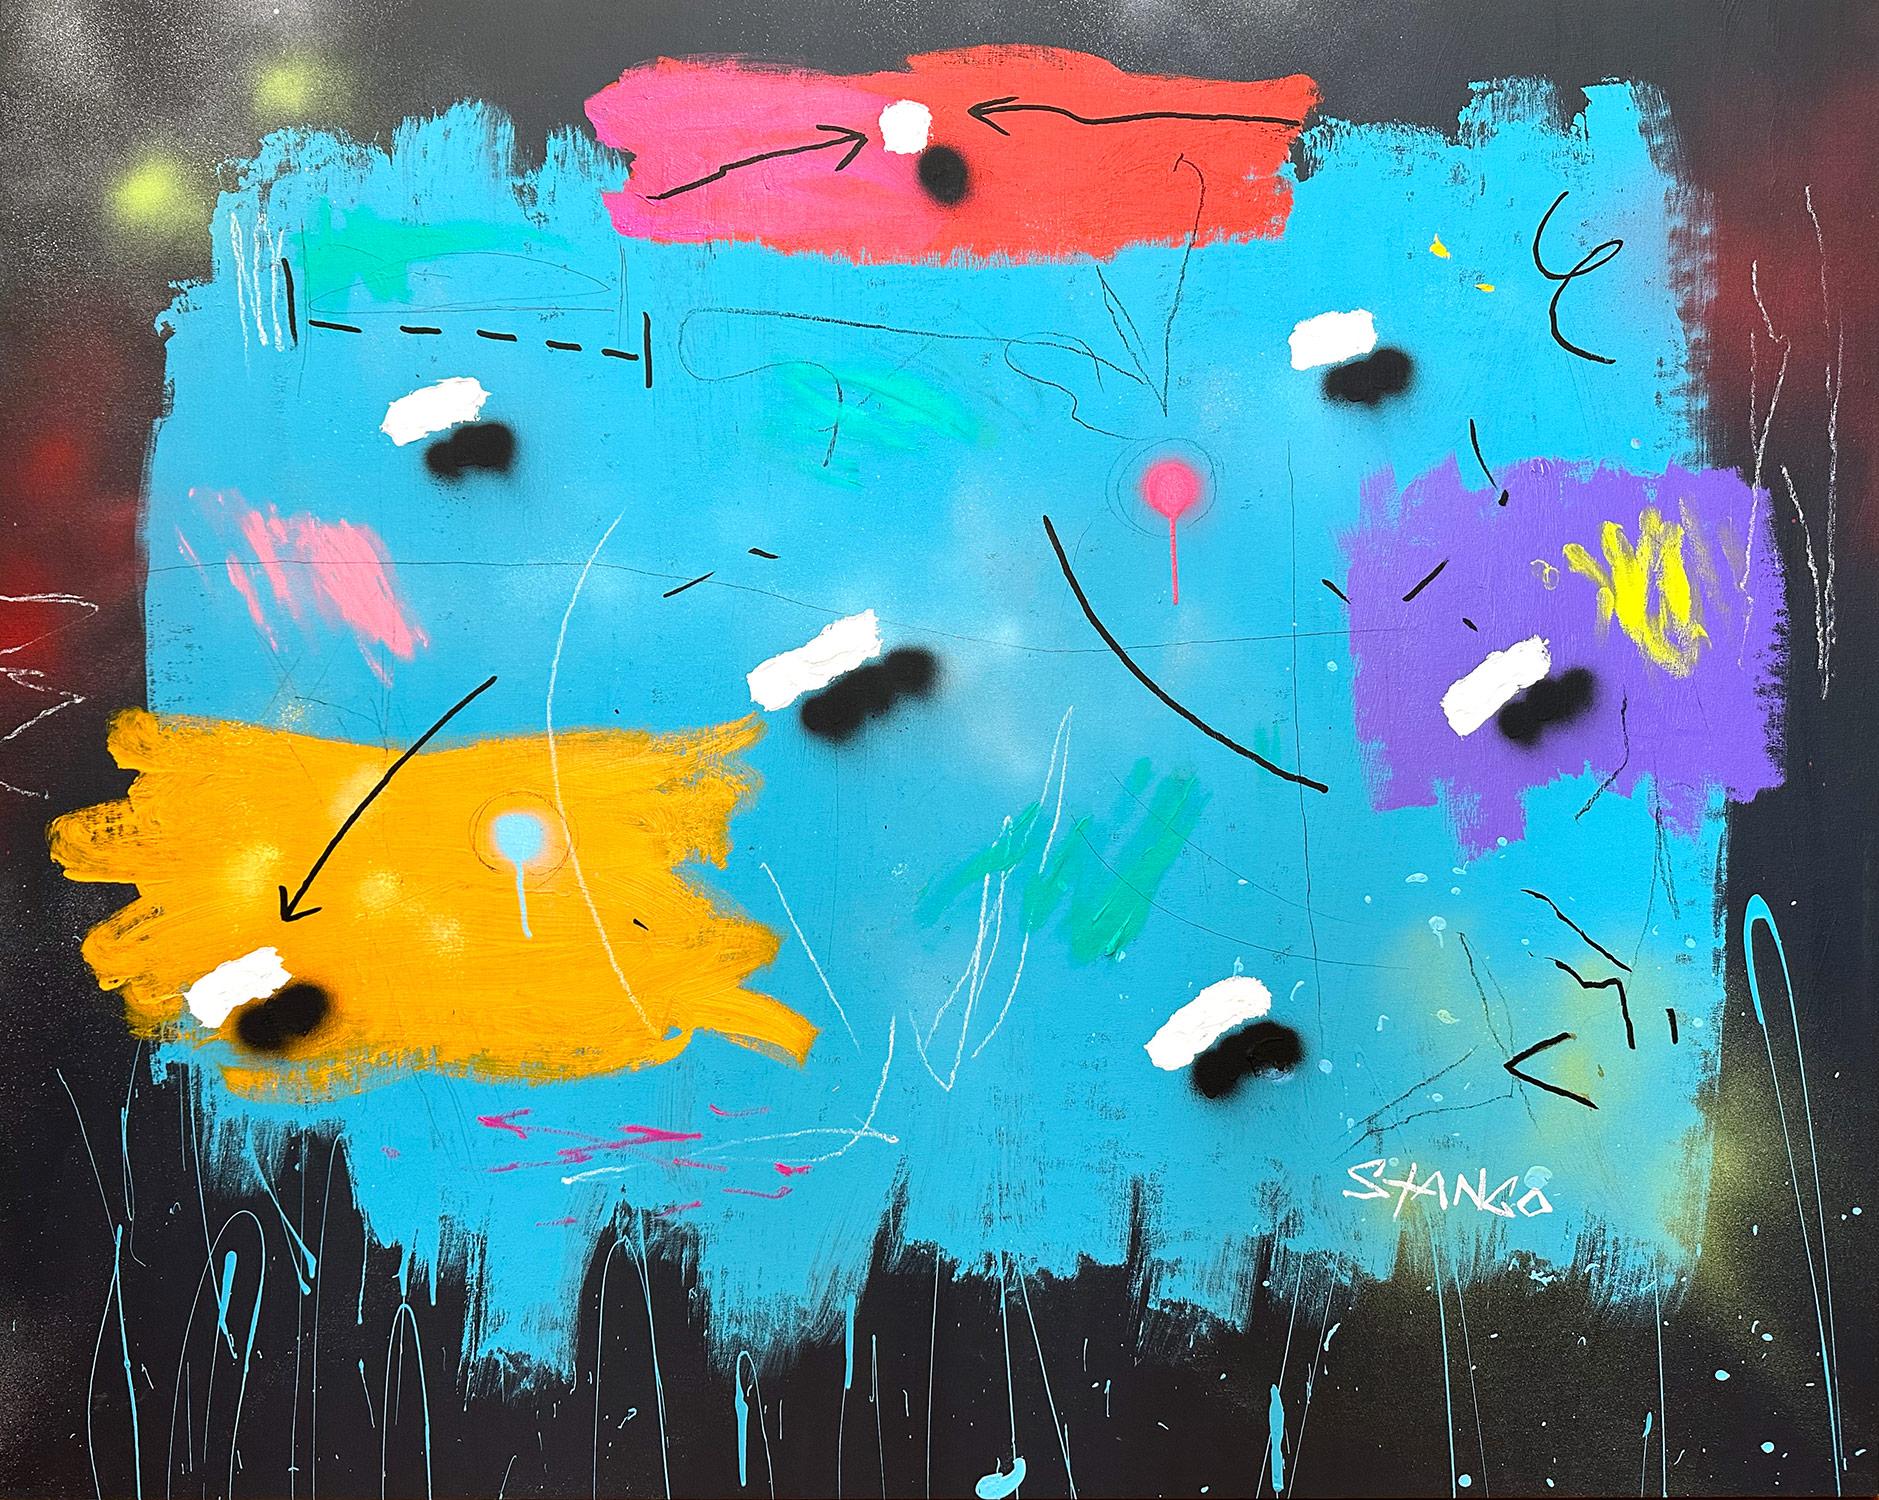 John Stango Abstract Painting - "Blue-Eyed Soul" Colorful Shapes with Black Background Abstract Pop Art Painting